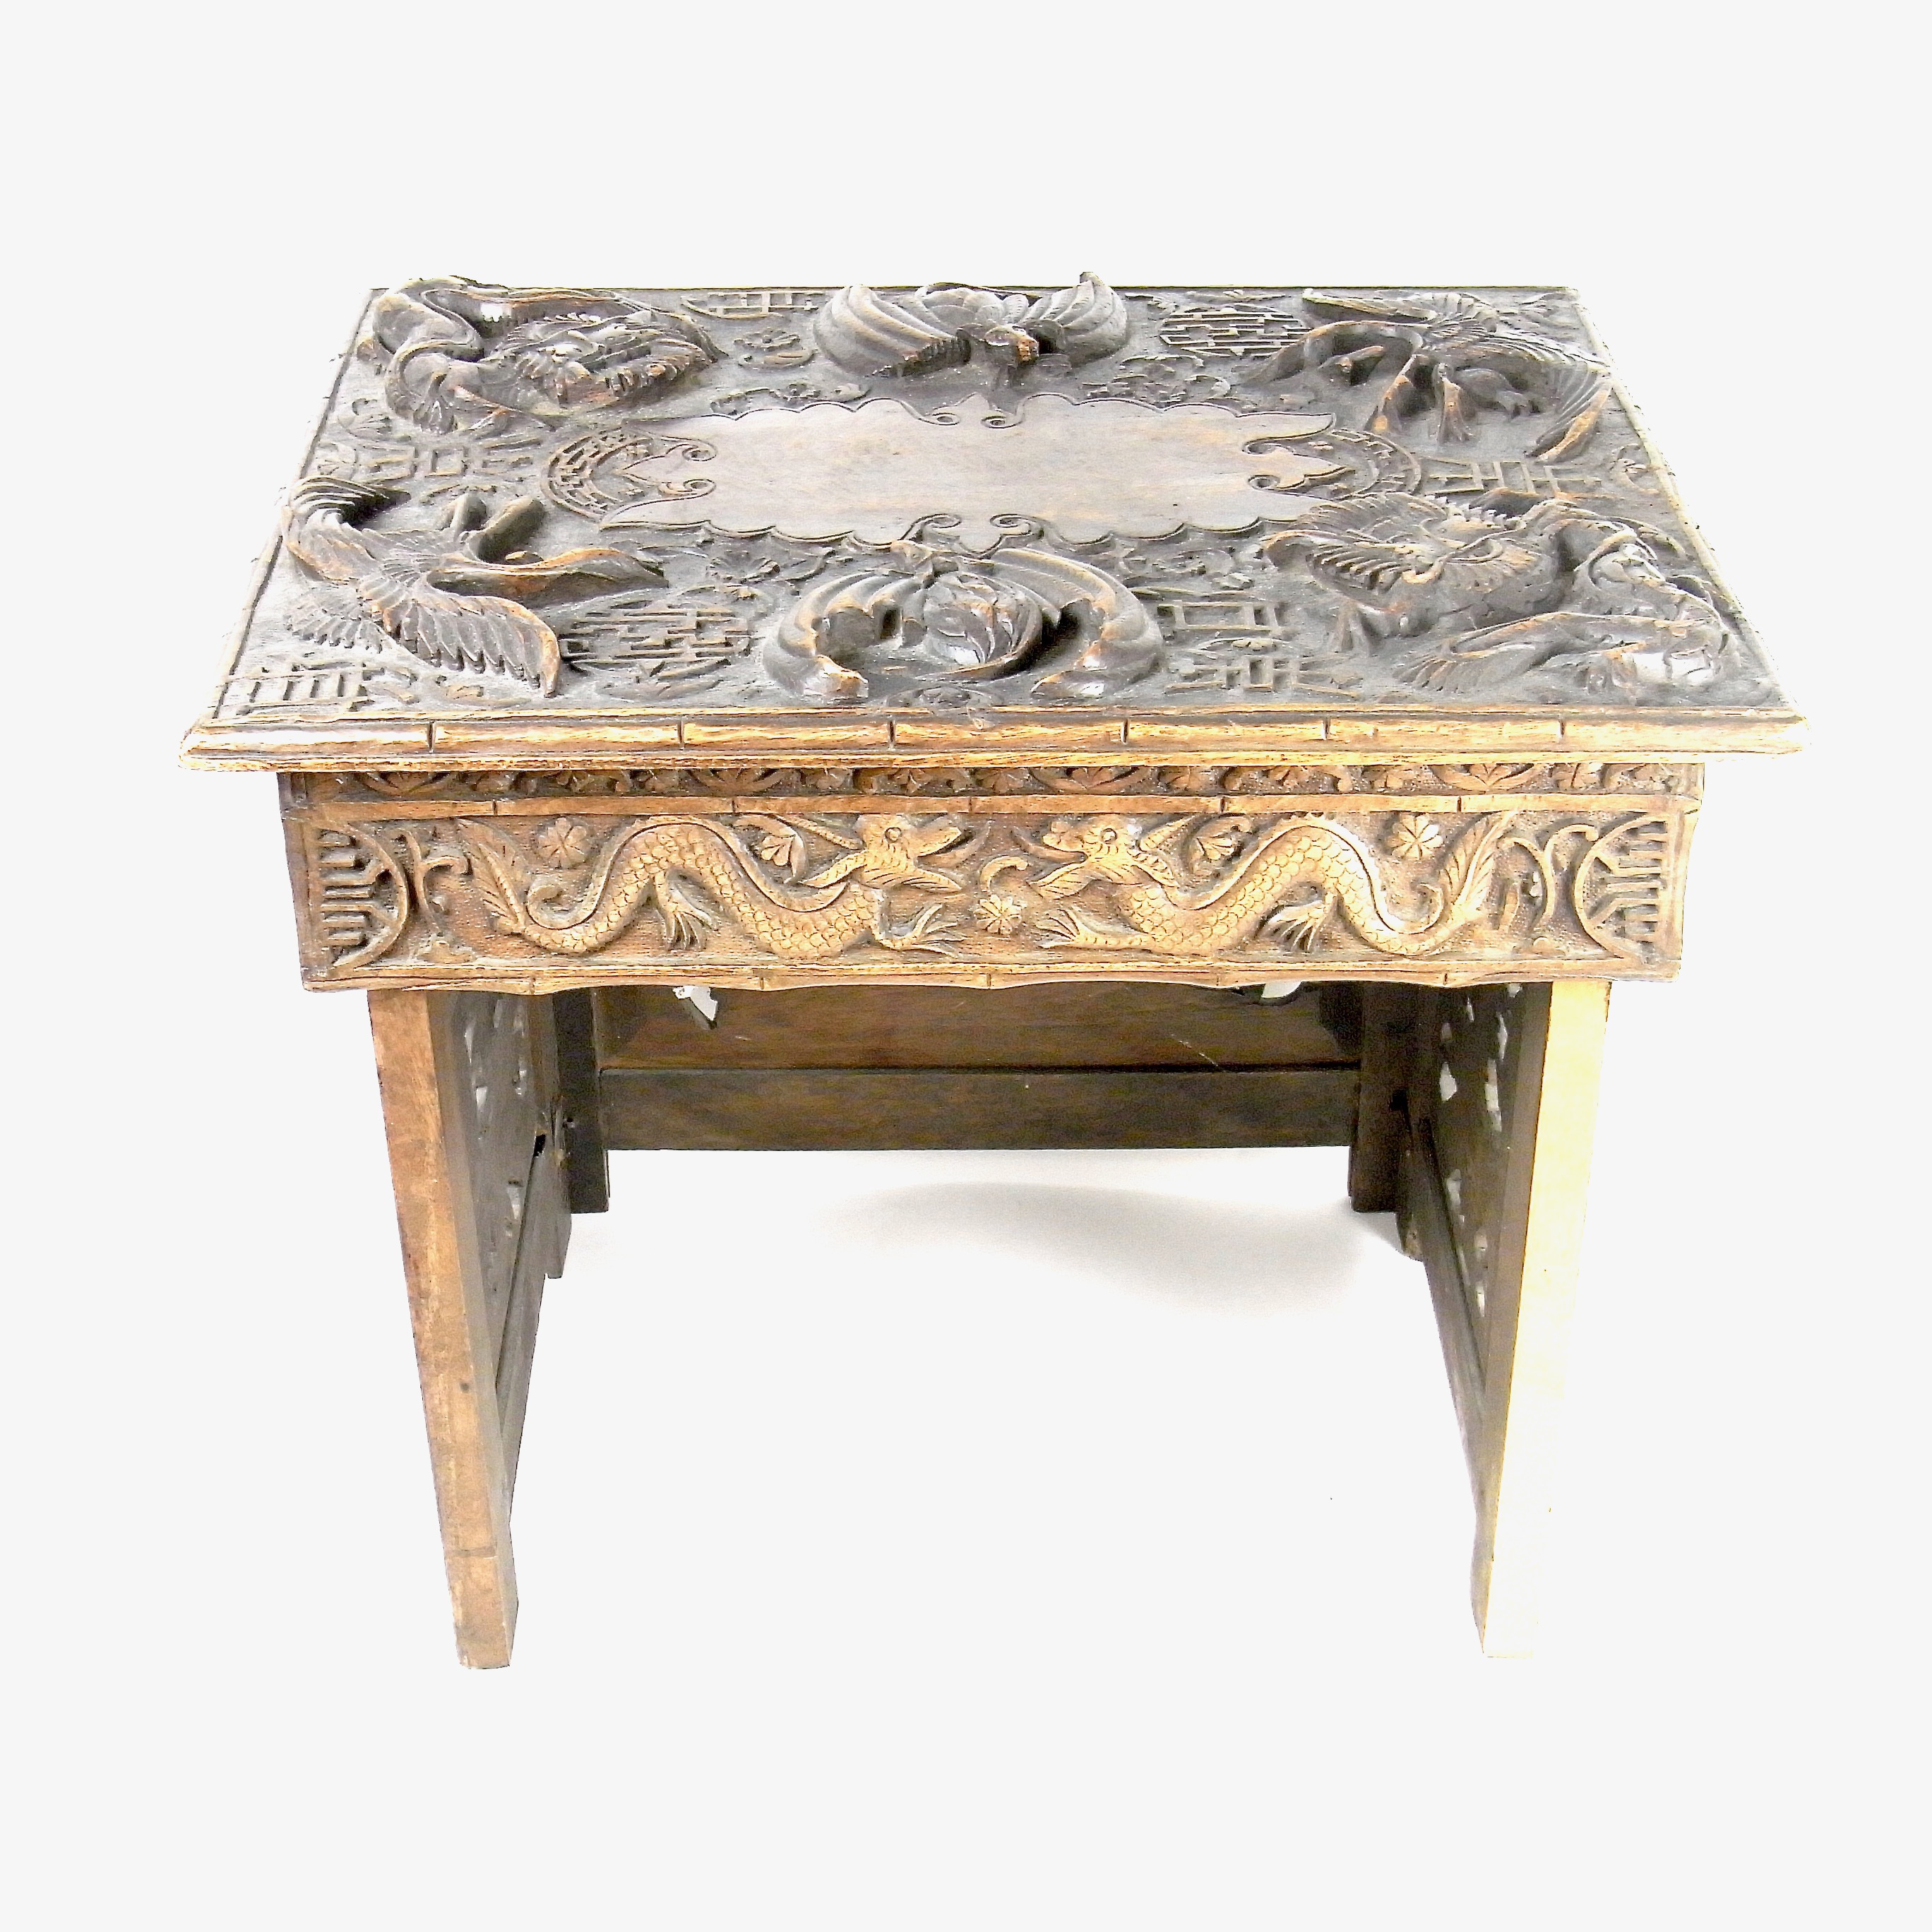 A Chinese carved wood prayer table, late 19th/early 20th century. - Image 5 of 6